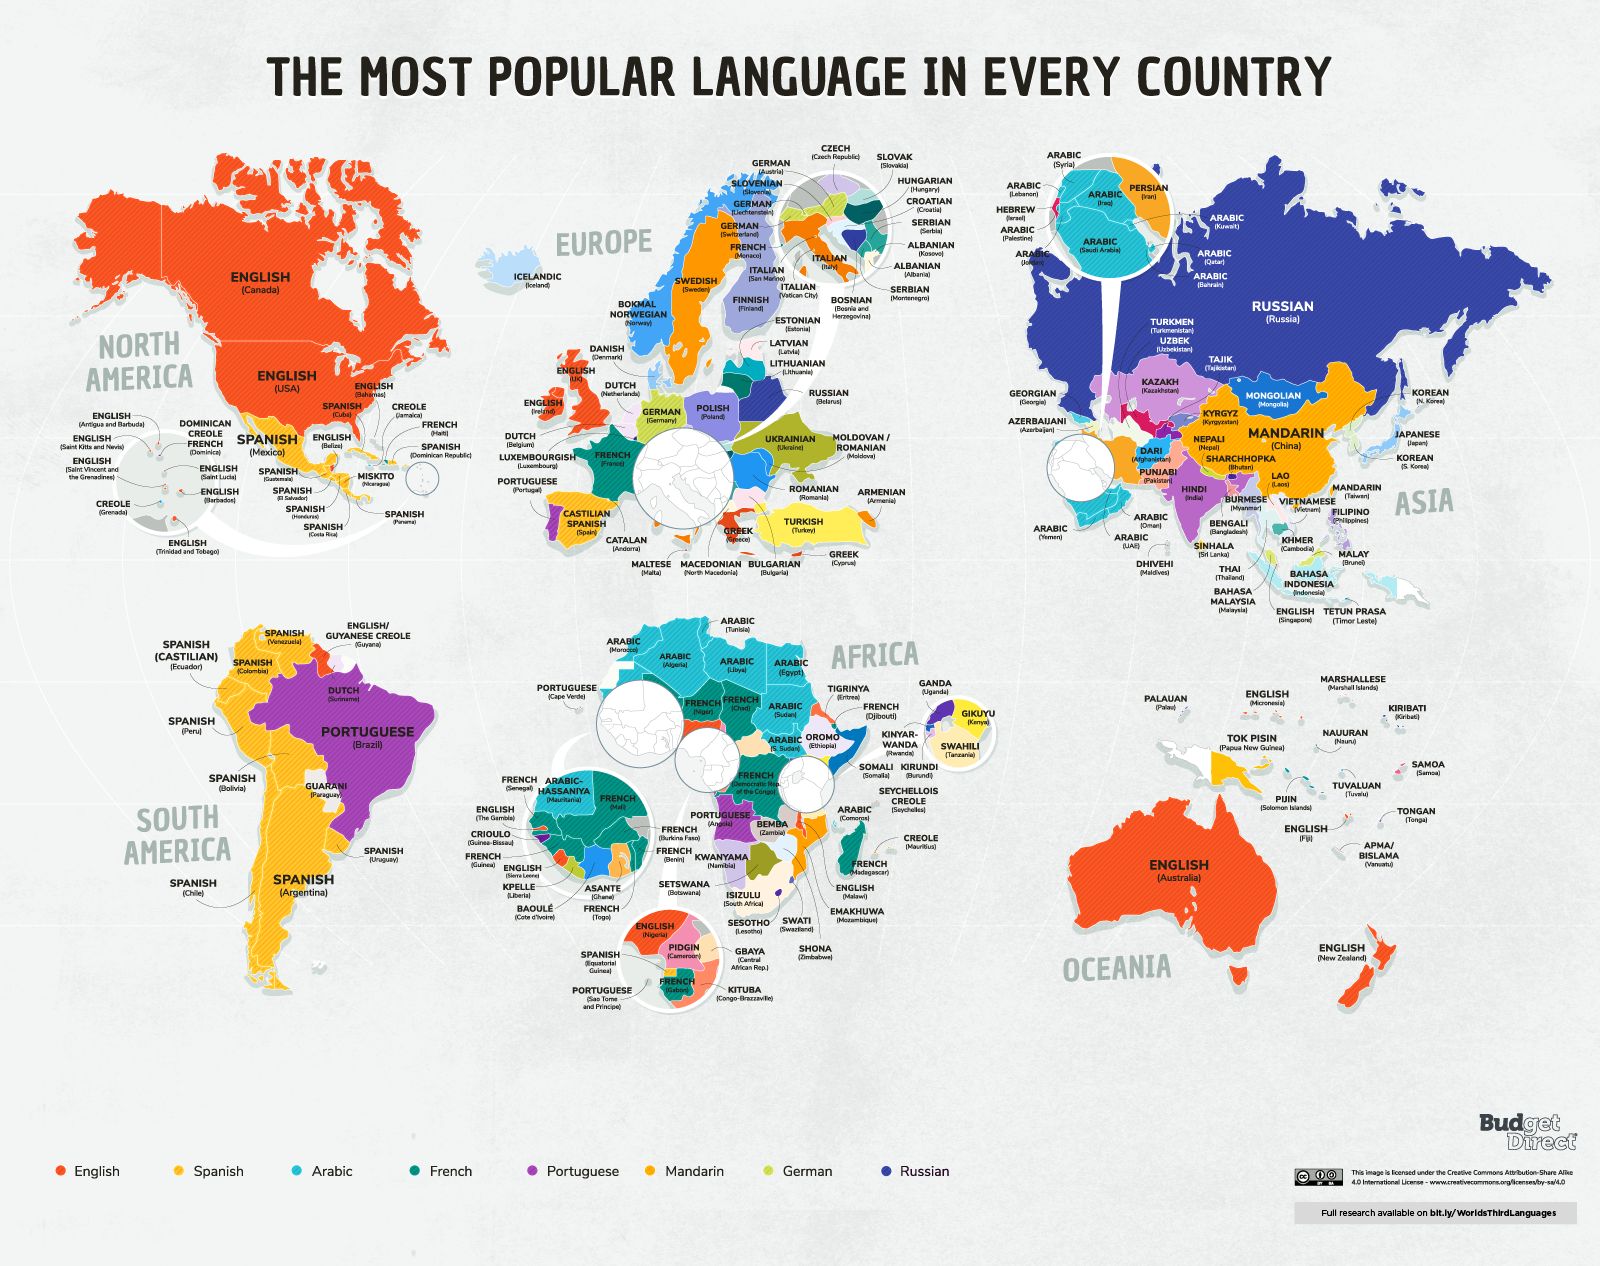 What Are The Third Most Popular Languages In Every Country In The